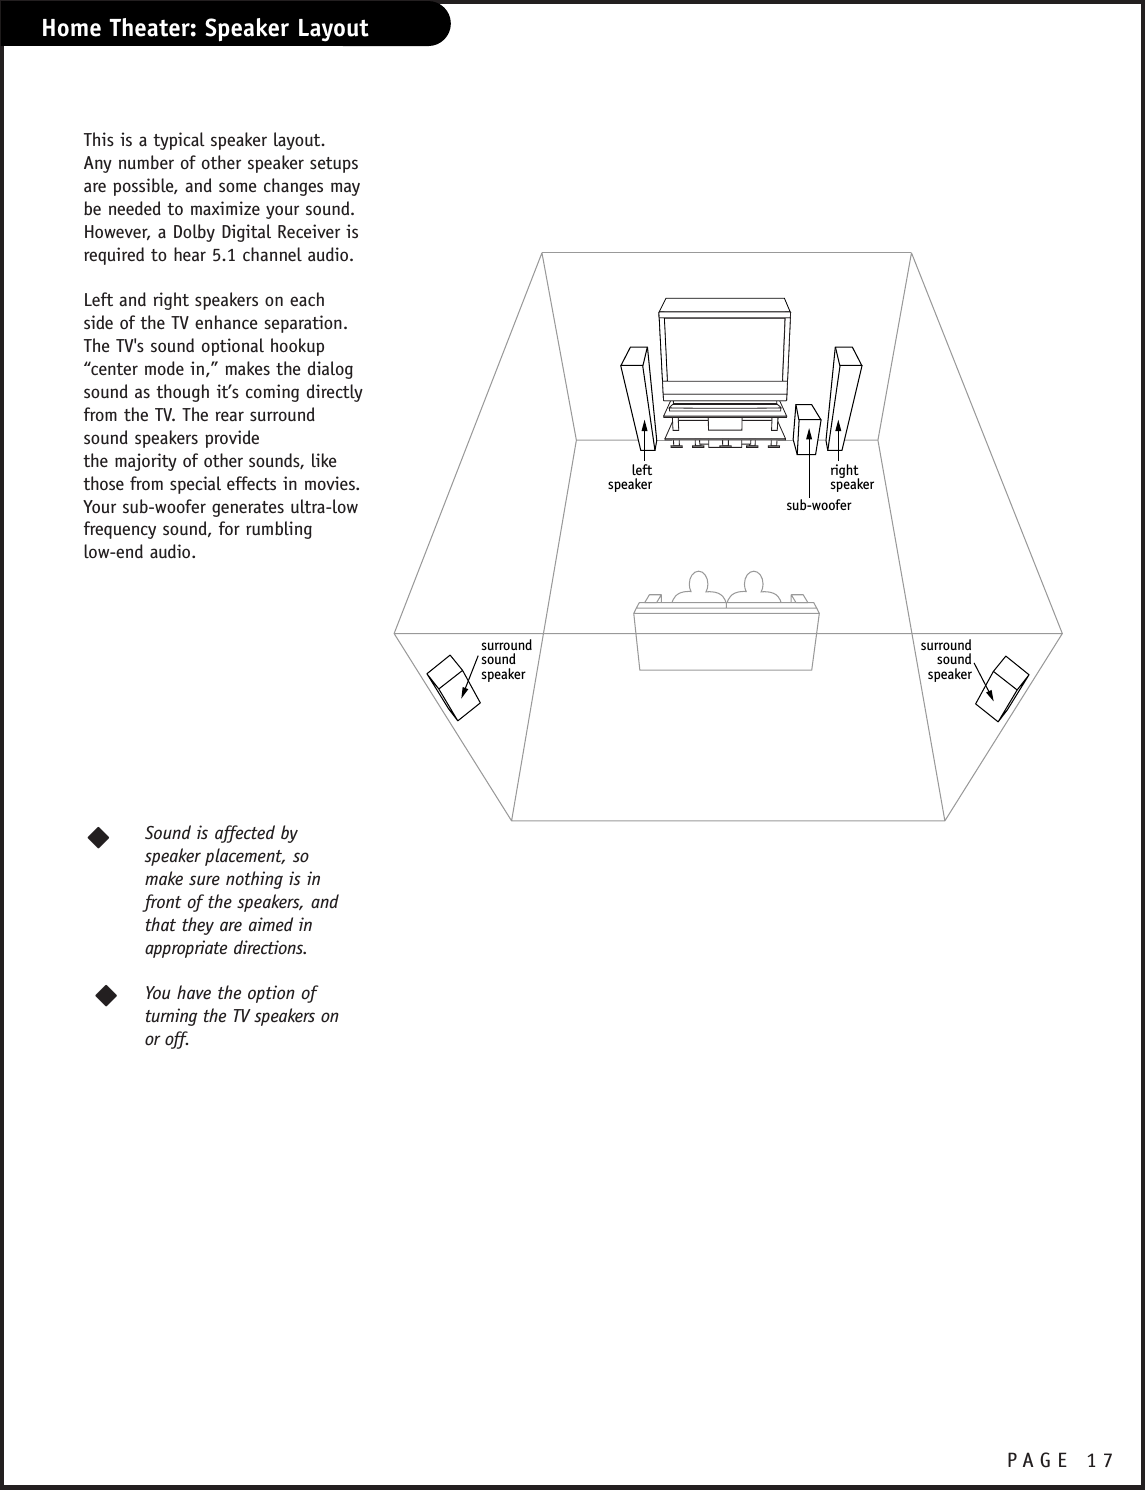 PAGE 17Home Theater: Speaker Layoutsub-wooferrightspeakerleftspeakersurroundsound speakersurroundsound speakerThis is a typical speaker layout. Any number of other speaker setupsare possible, and some changes maybe needed to maximize your sound.However, a Dolby Digital Receiver isrequired to hear 5.1 channel audio.Left and right speakers on each side of the TV enhance separation.The TV&apos;s sound optional hookup“center mode in,” makes the dialogsound as though it’s coming directlyfrom the TV. The rear surroundsound speakers provide the majority of other sounds, likethose from special effects in movies.Your sub-woofer generates ultra-low frequency sound, for rumbling low-end audio.Sound is affected by speaker placement, so make sure nothing is infront of the speakers, andthat they are aimed inappropriate directions.You have the option of turning the TV speakers onor off.W W 